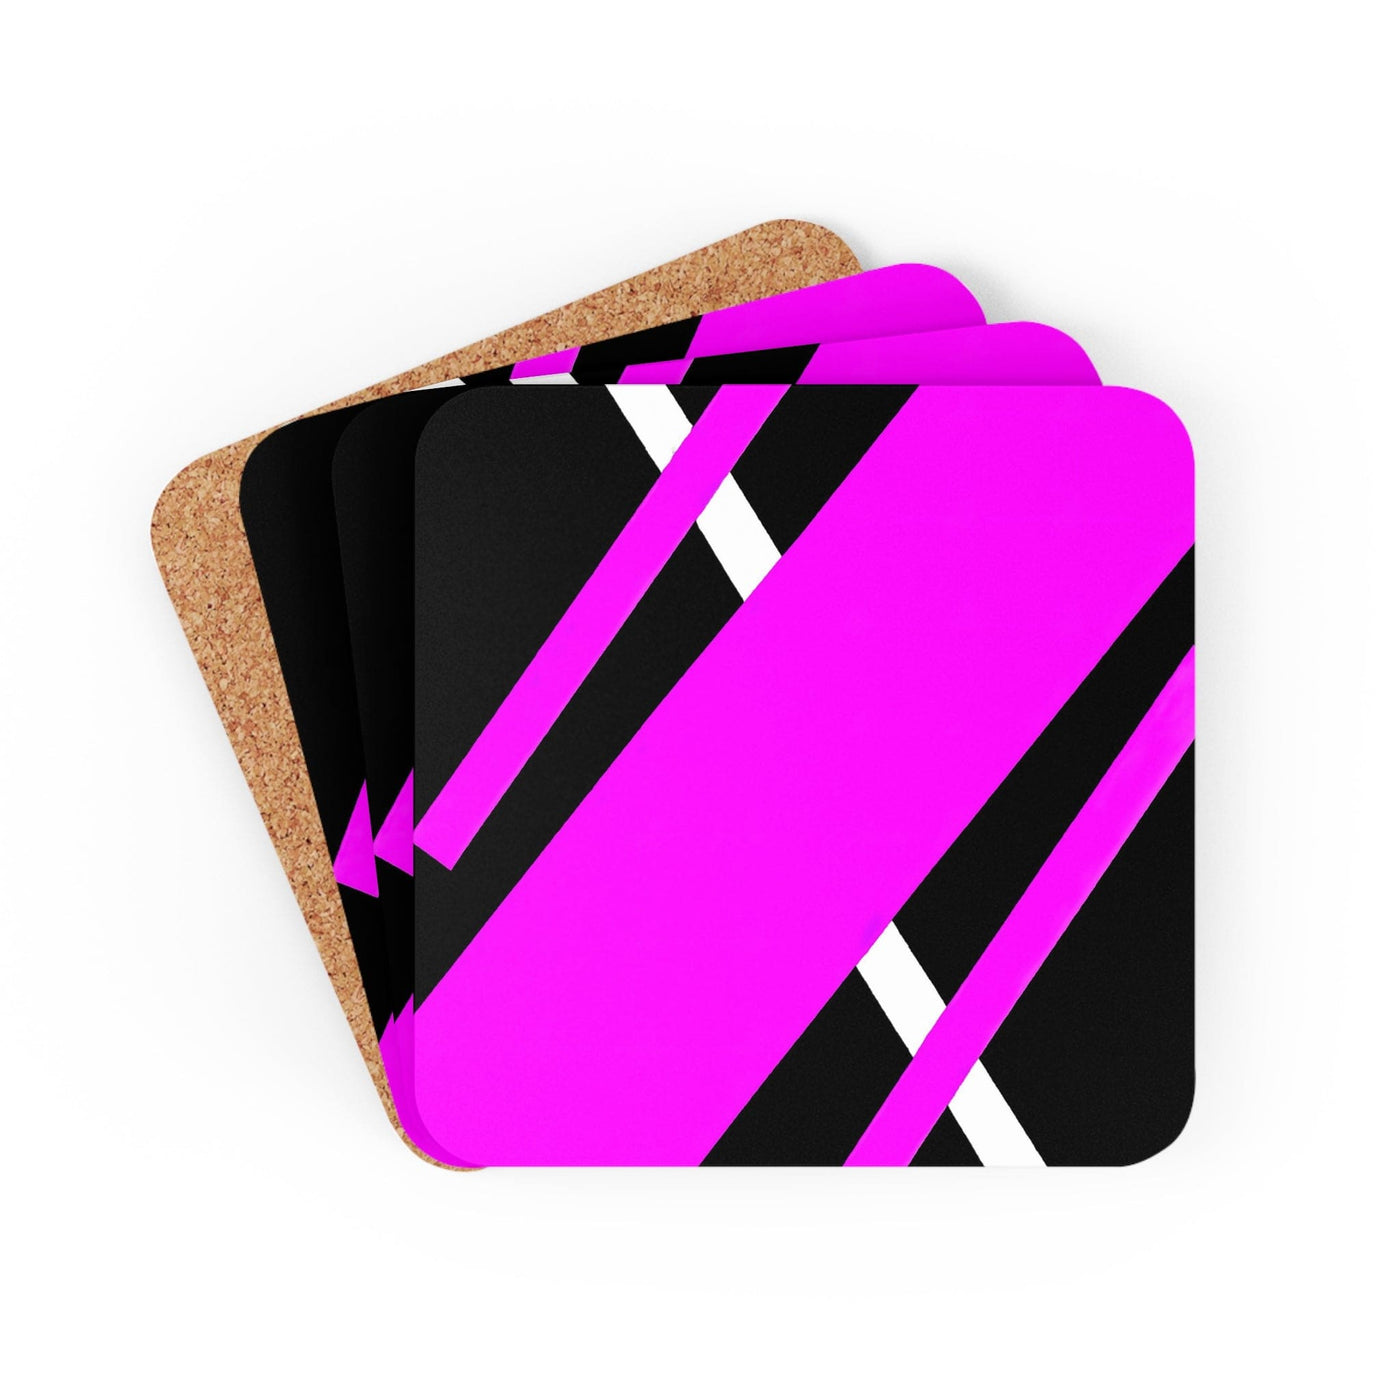 Coaster Set Of 4 For Drinks Black And Pink Pattern - Decorative | Coasters